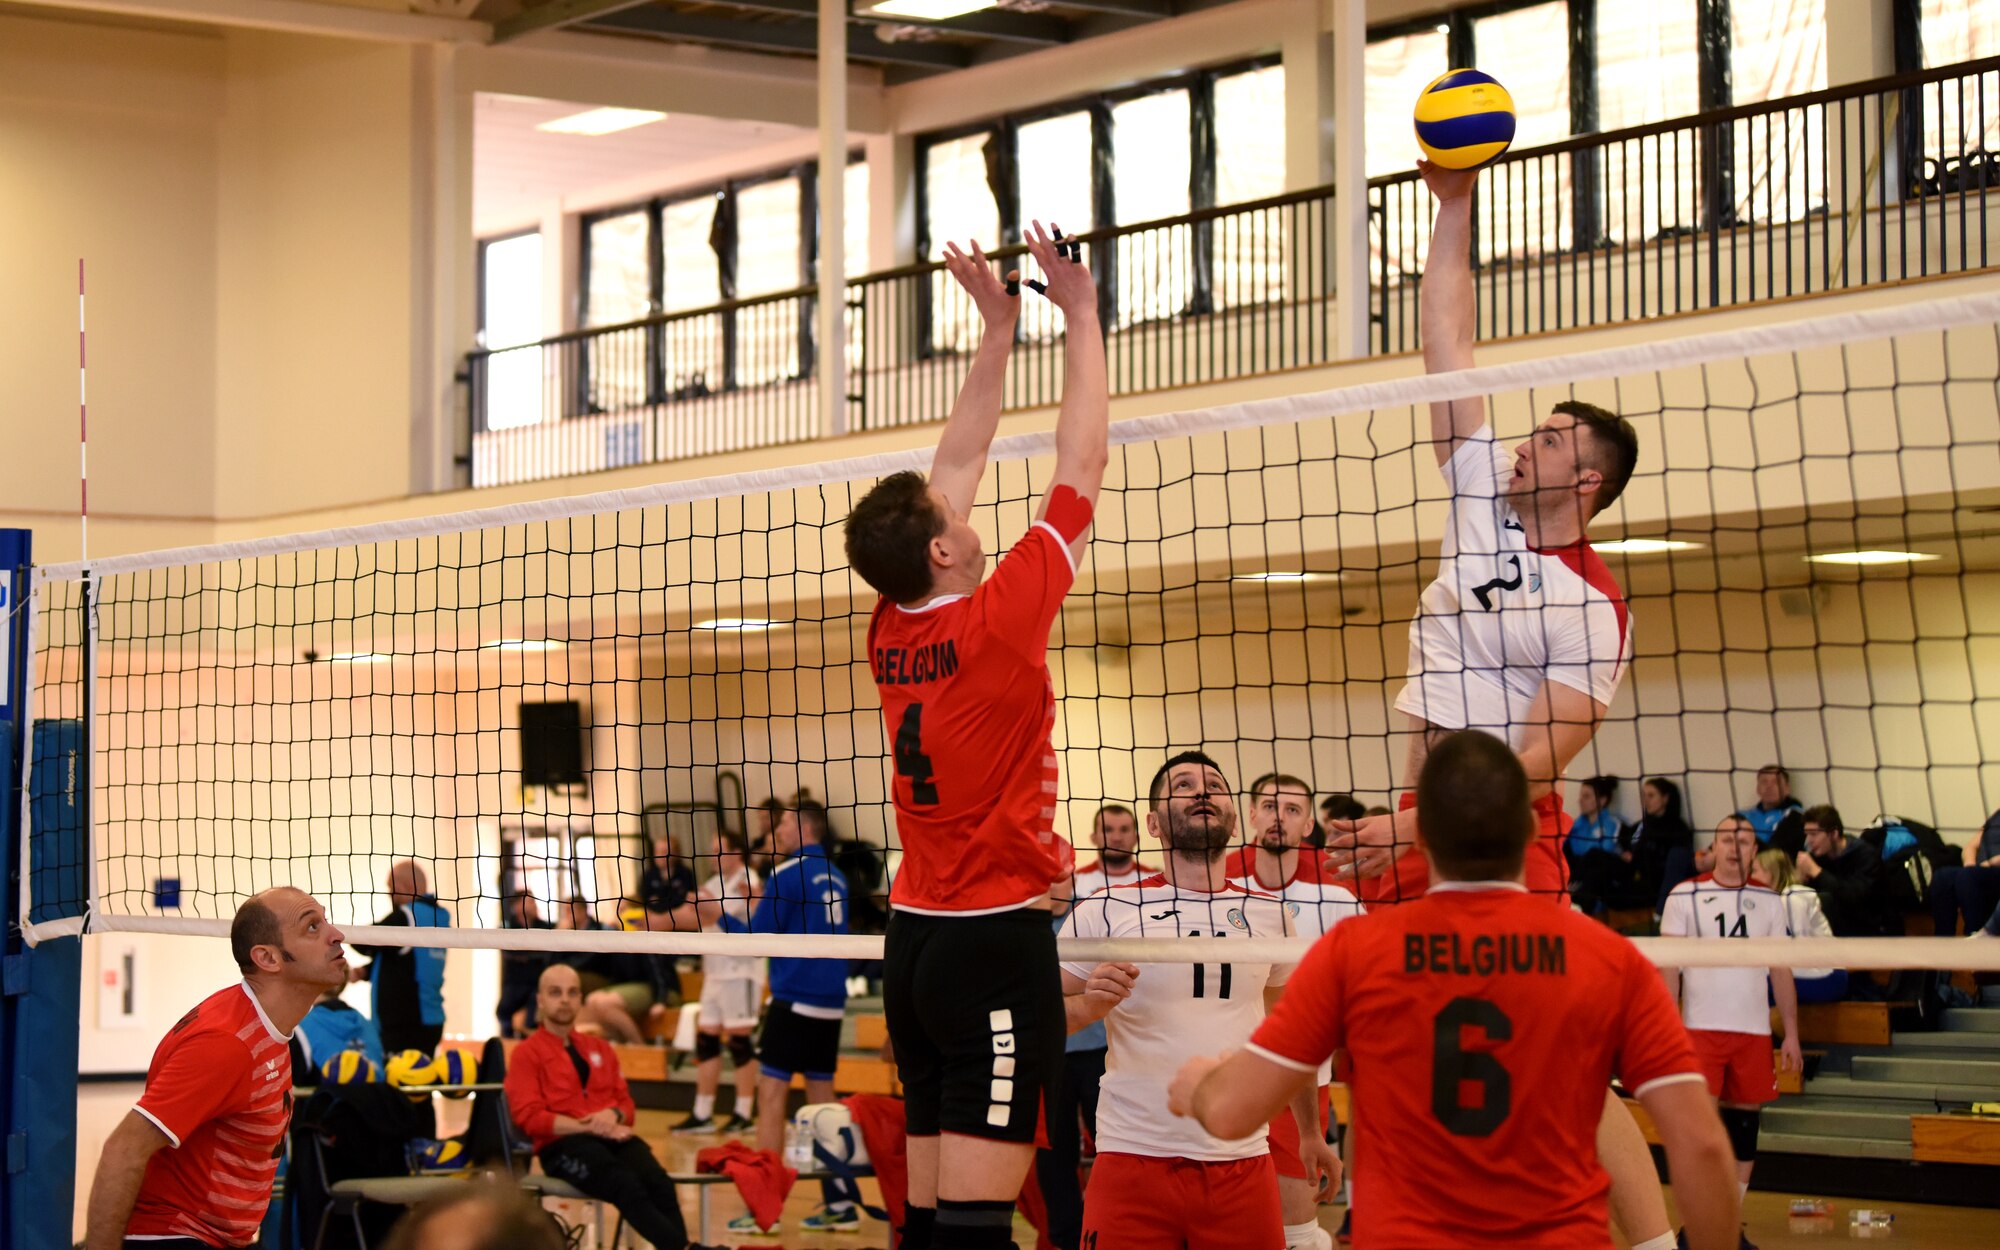 A member of the Polish air force spikes a volleyball during the 2020 Allied Air Command Inter-Nation Volleyball Championship at RAF Mildenhall, England, Feb. 19, 2020. This international sports championship brought together the contributing nations within Allied Air Command with an opportunity for friendly sporting competition. (U.S. Air Force photo by Senior Airman Brandon Esau)